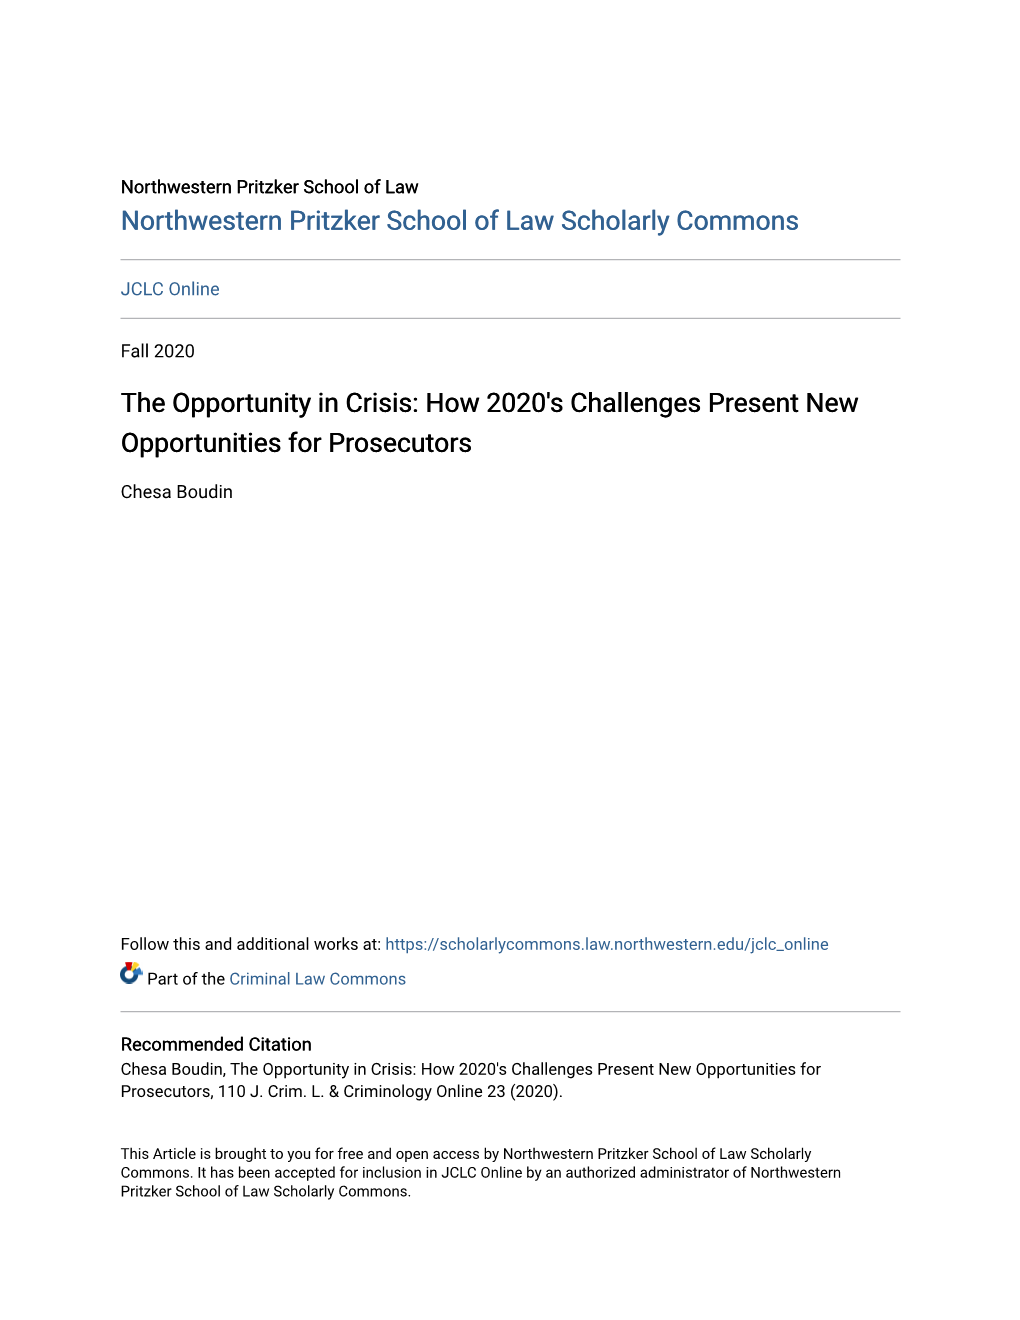 The Opportunity in Crisis: How 2020'S Challenges Present New Opportunities for Prosecutors